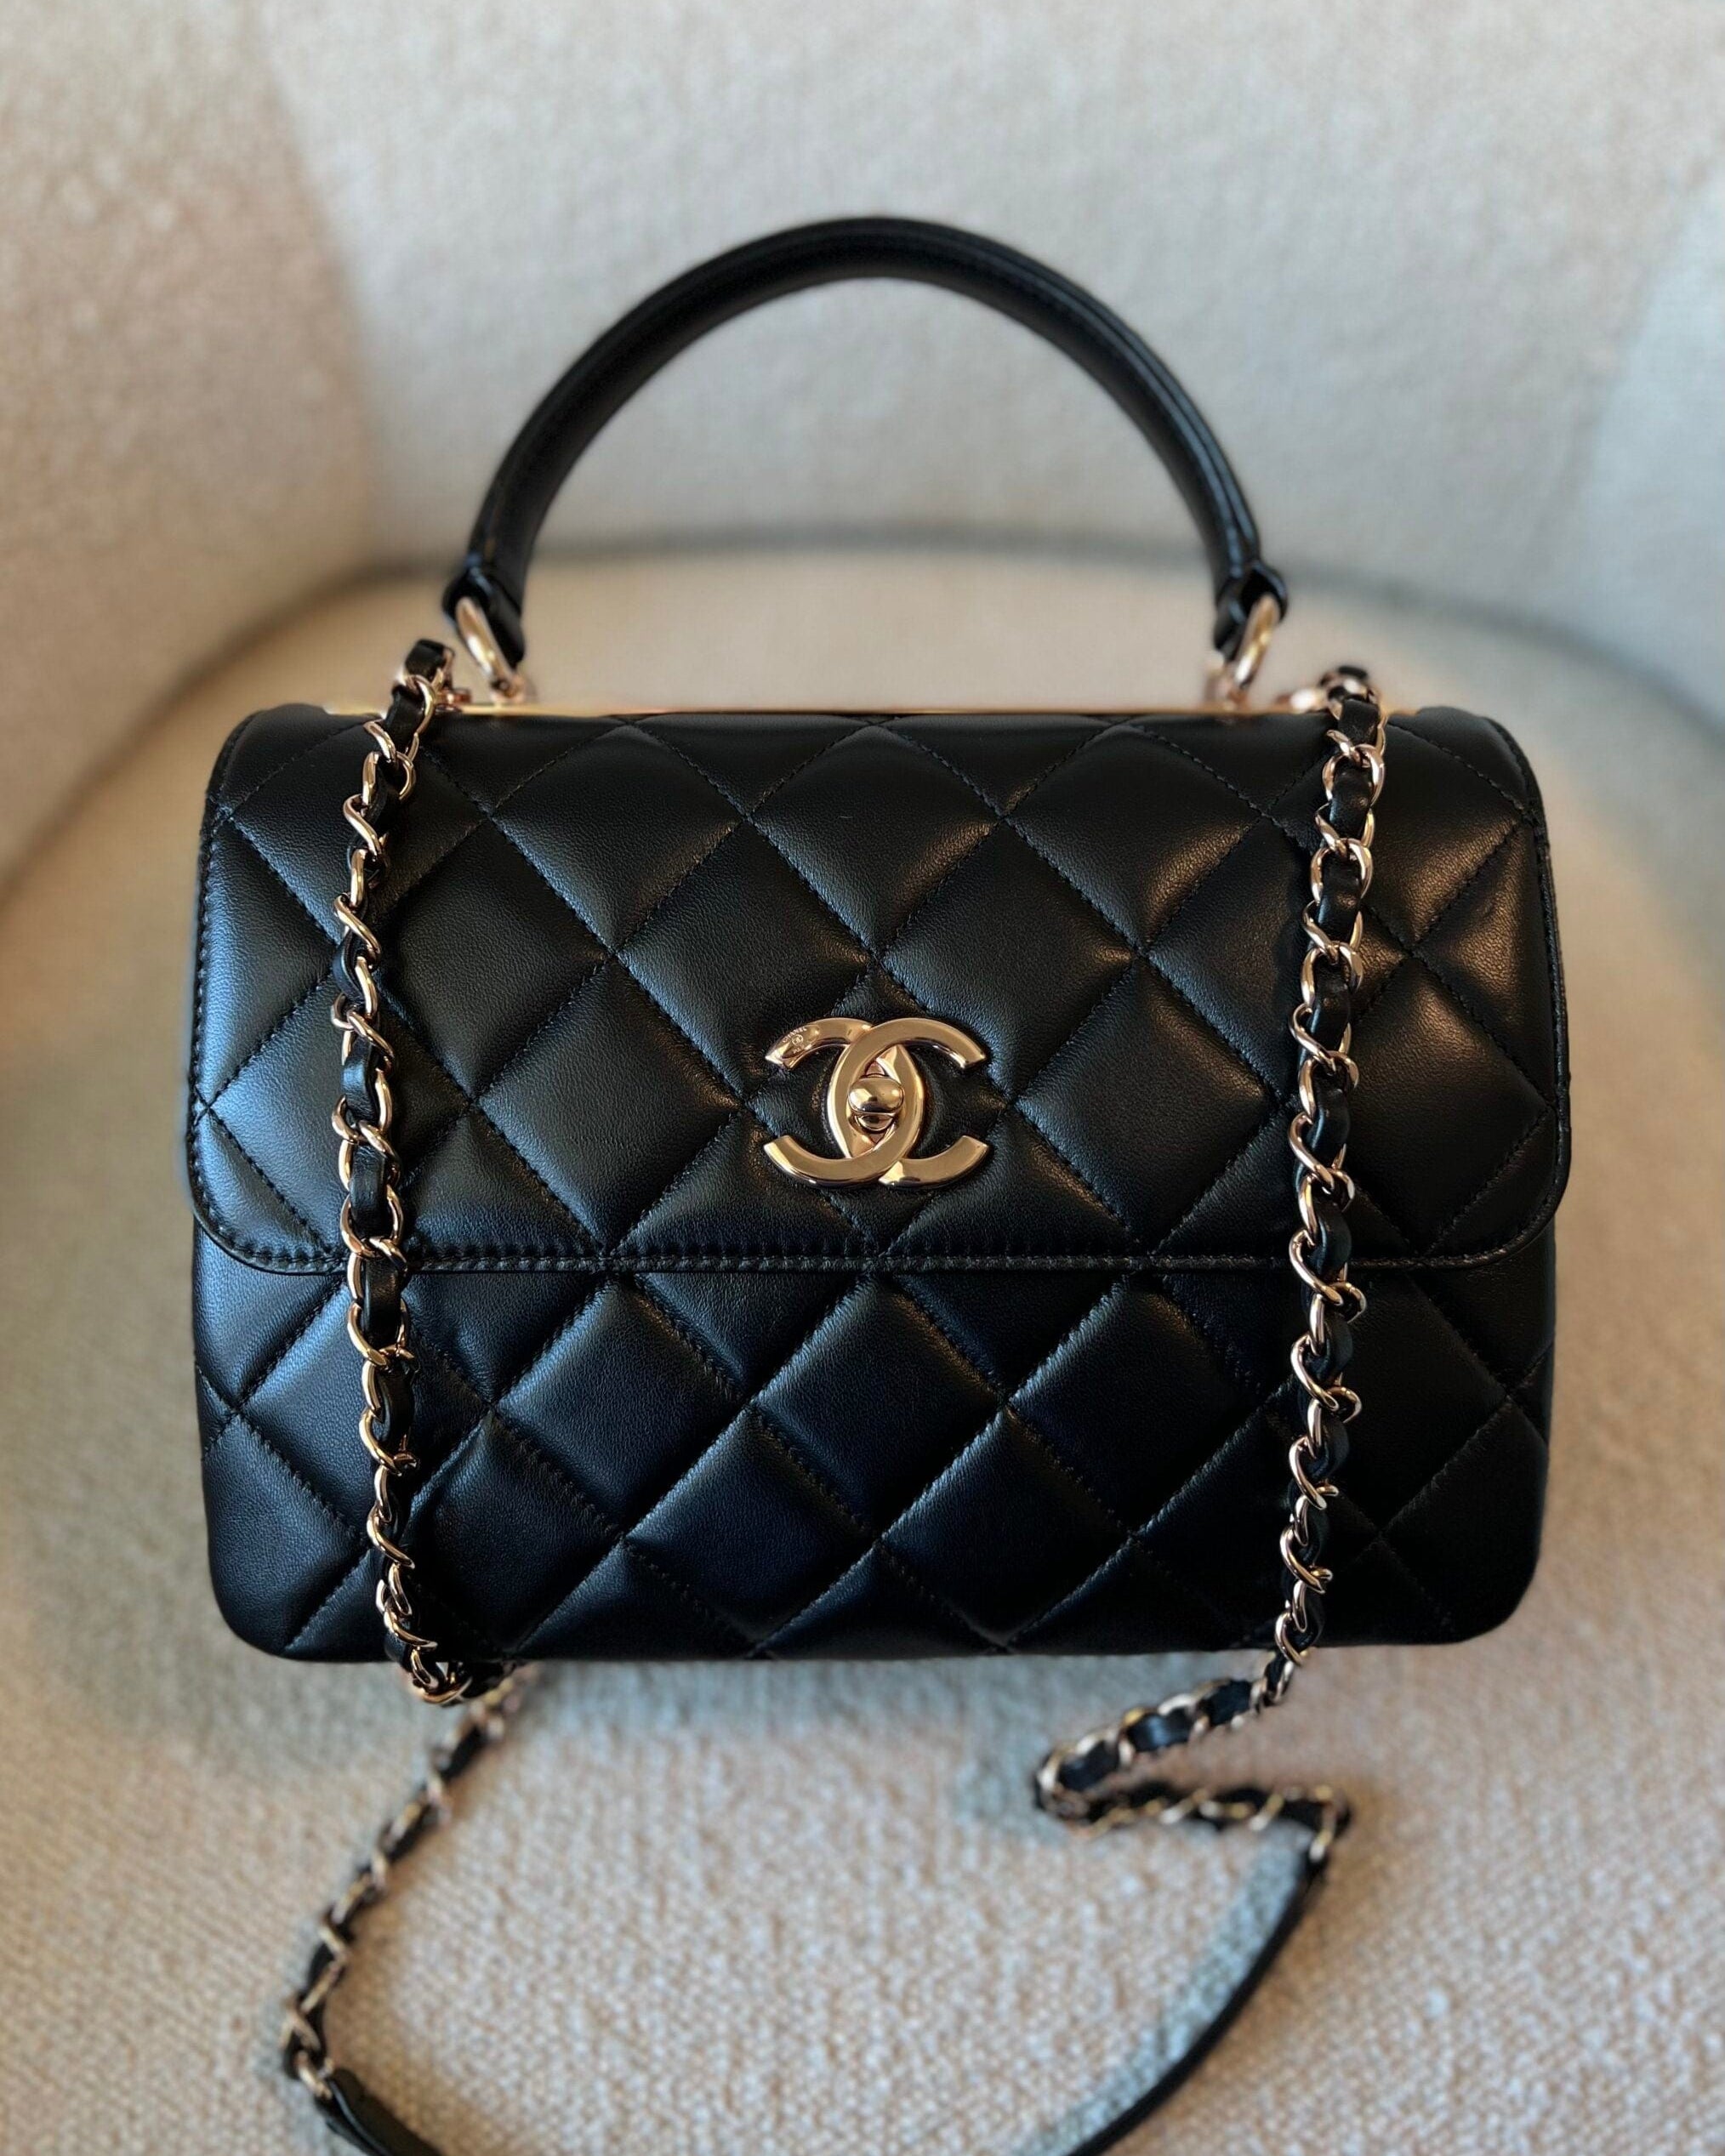 CHANEL Handbag Chanel 21B Black Lambskin Quilted Trendy CC Rose Gold Hardware - Redeluxe